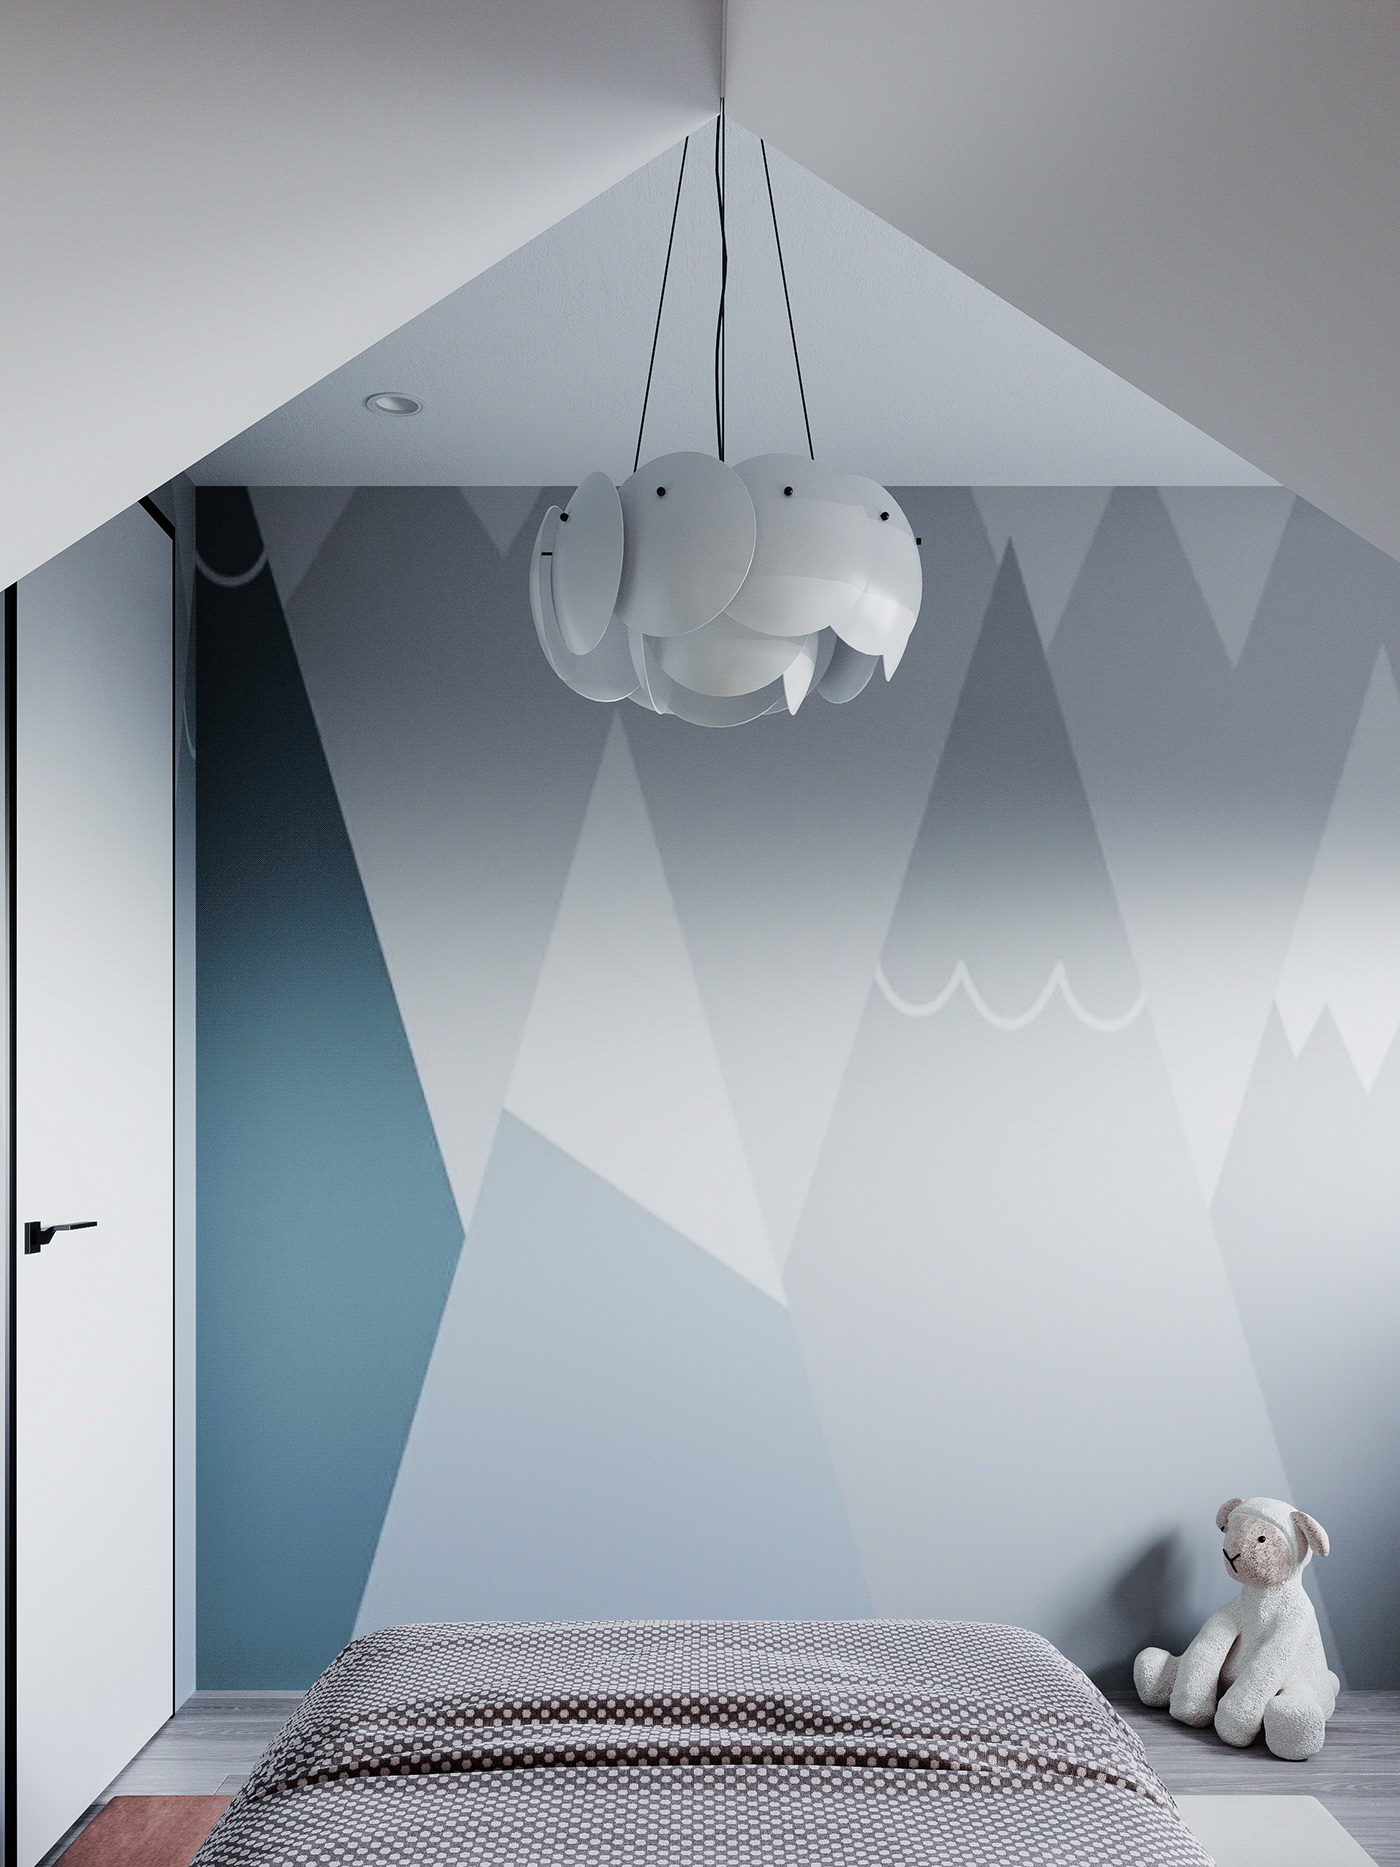 The bright pastel blue ceiling lamp not only provides lighting for the room, but it also matches the child's preferences.